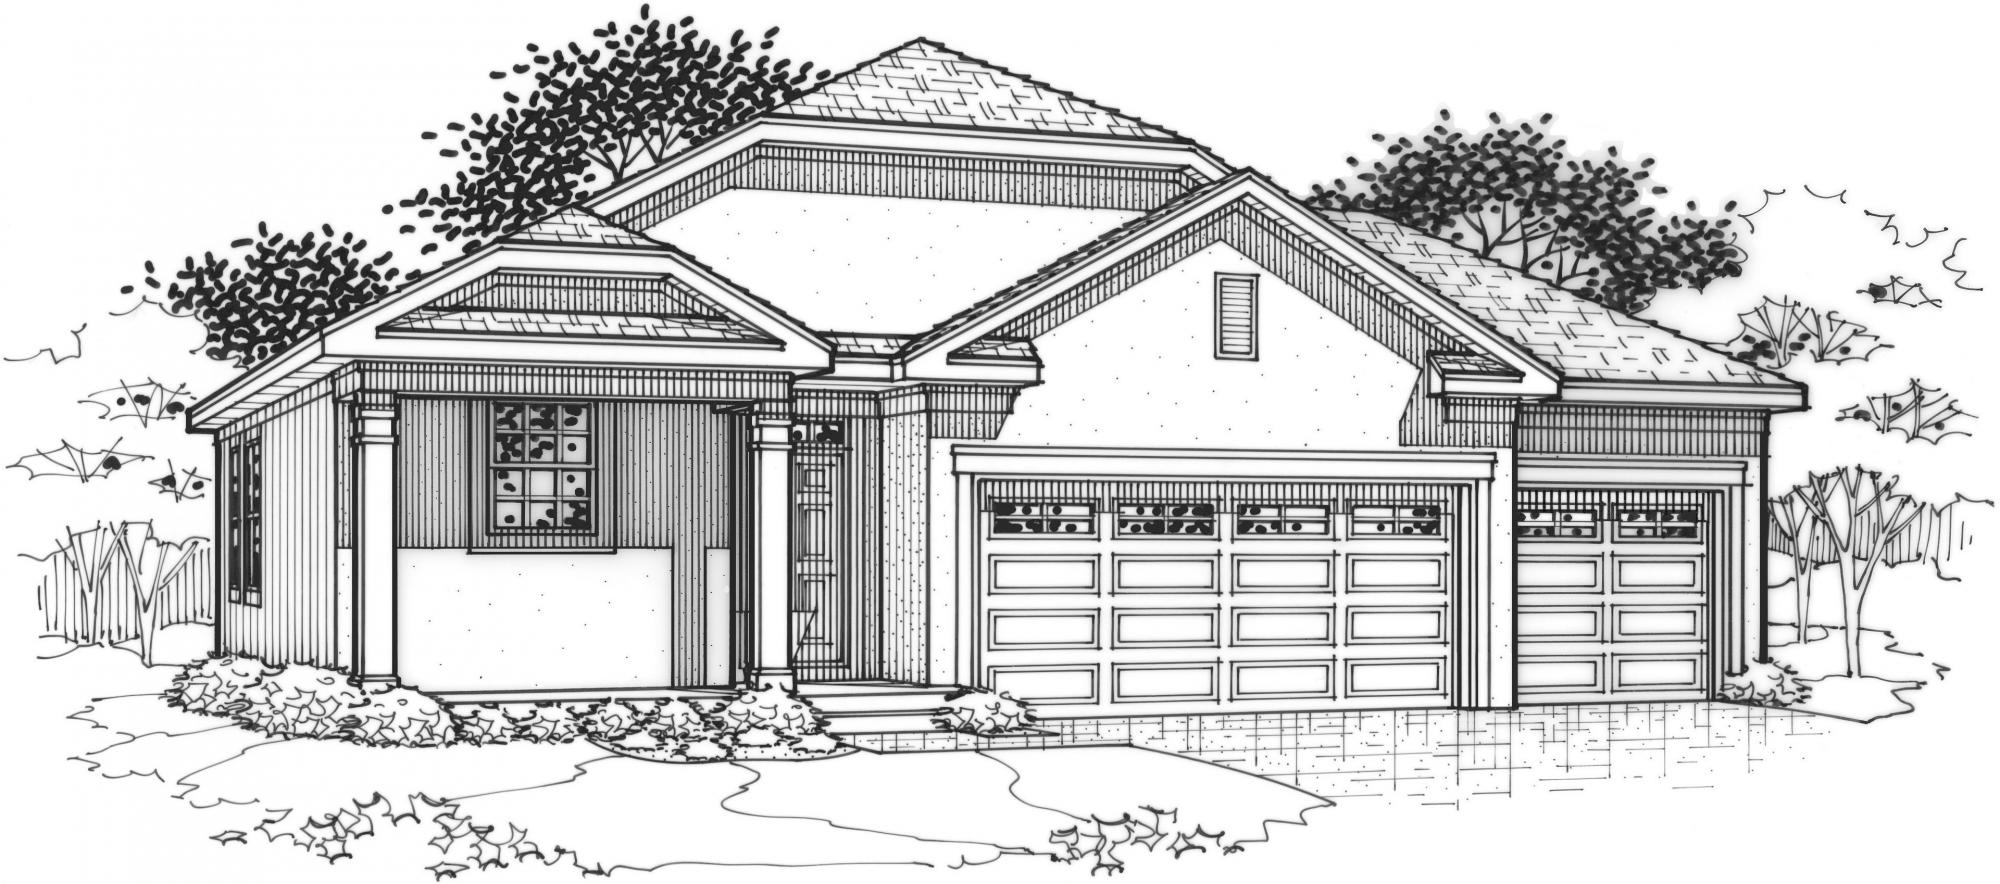 black and white rendering of a bradford model from Lambie custom homes